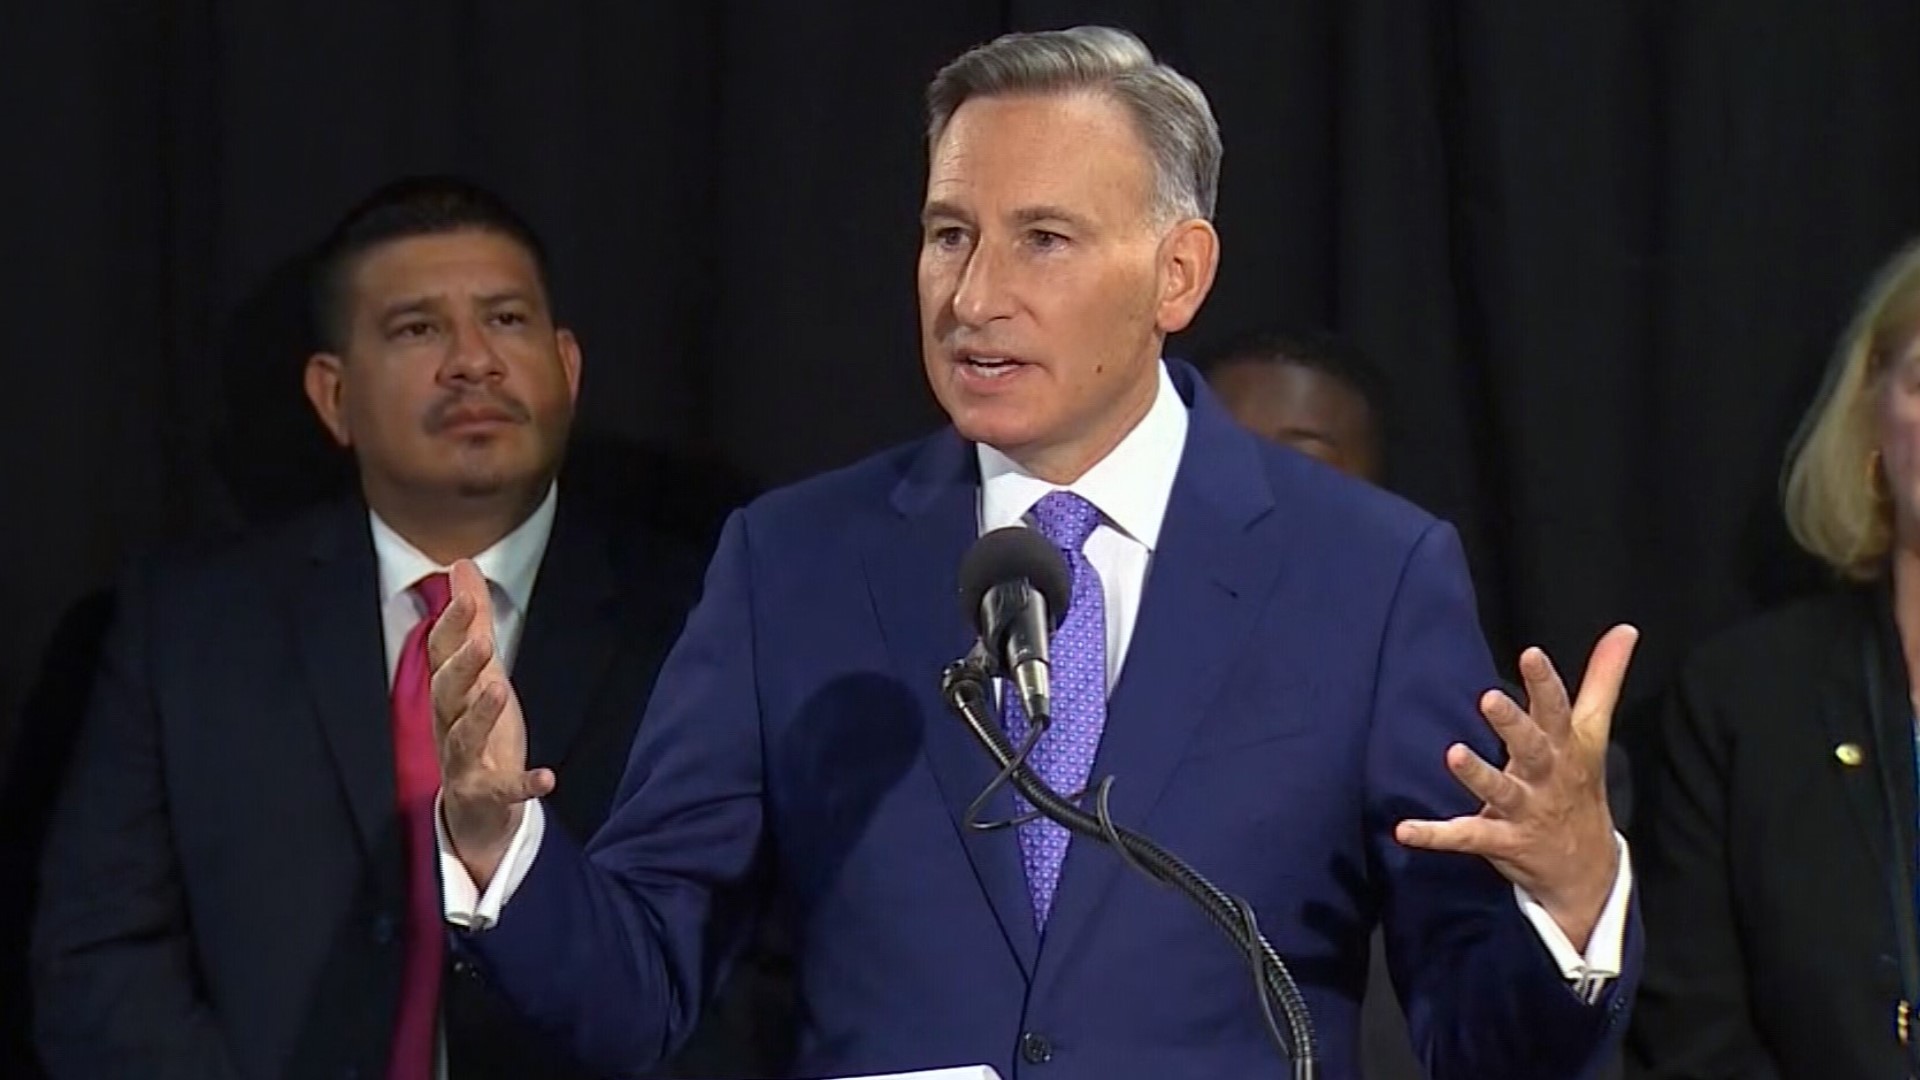 King County Executive Dow Constantine pitches a regional authority to deal with the homeless crisis during a news conference on September 4, 2019.